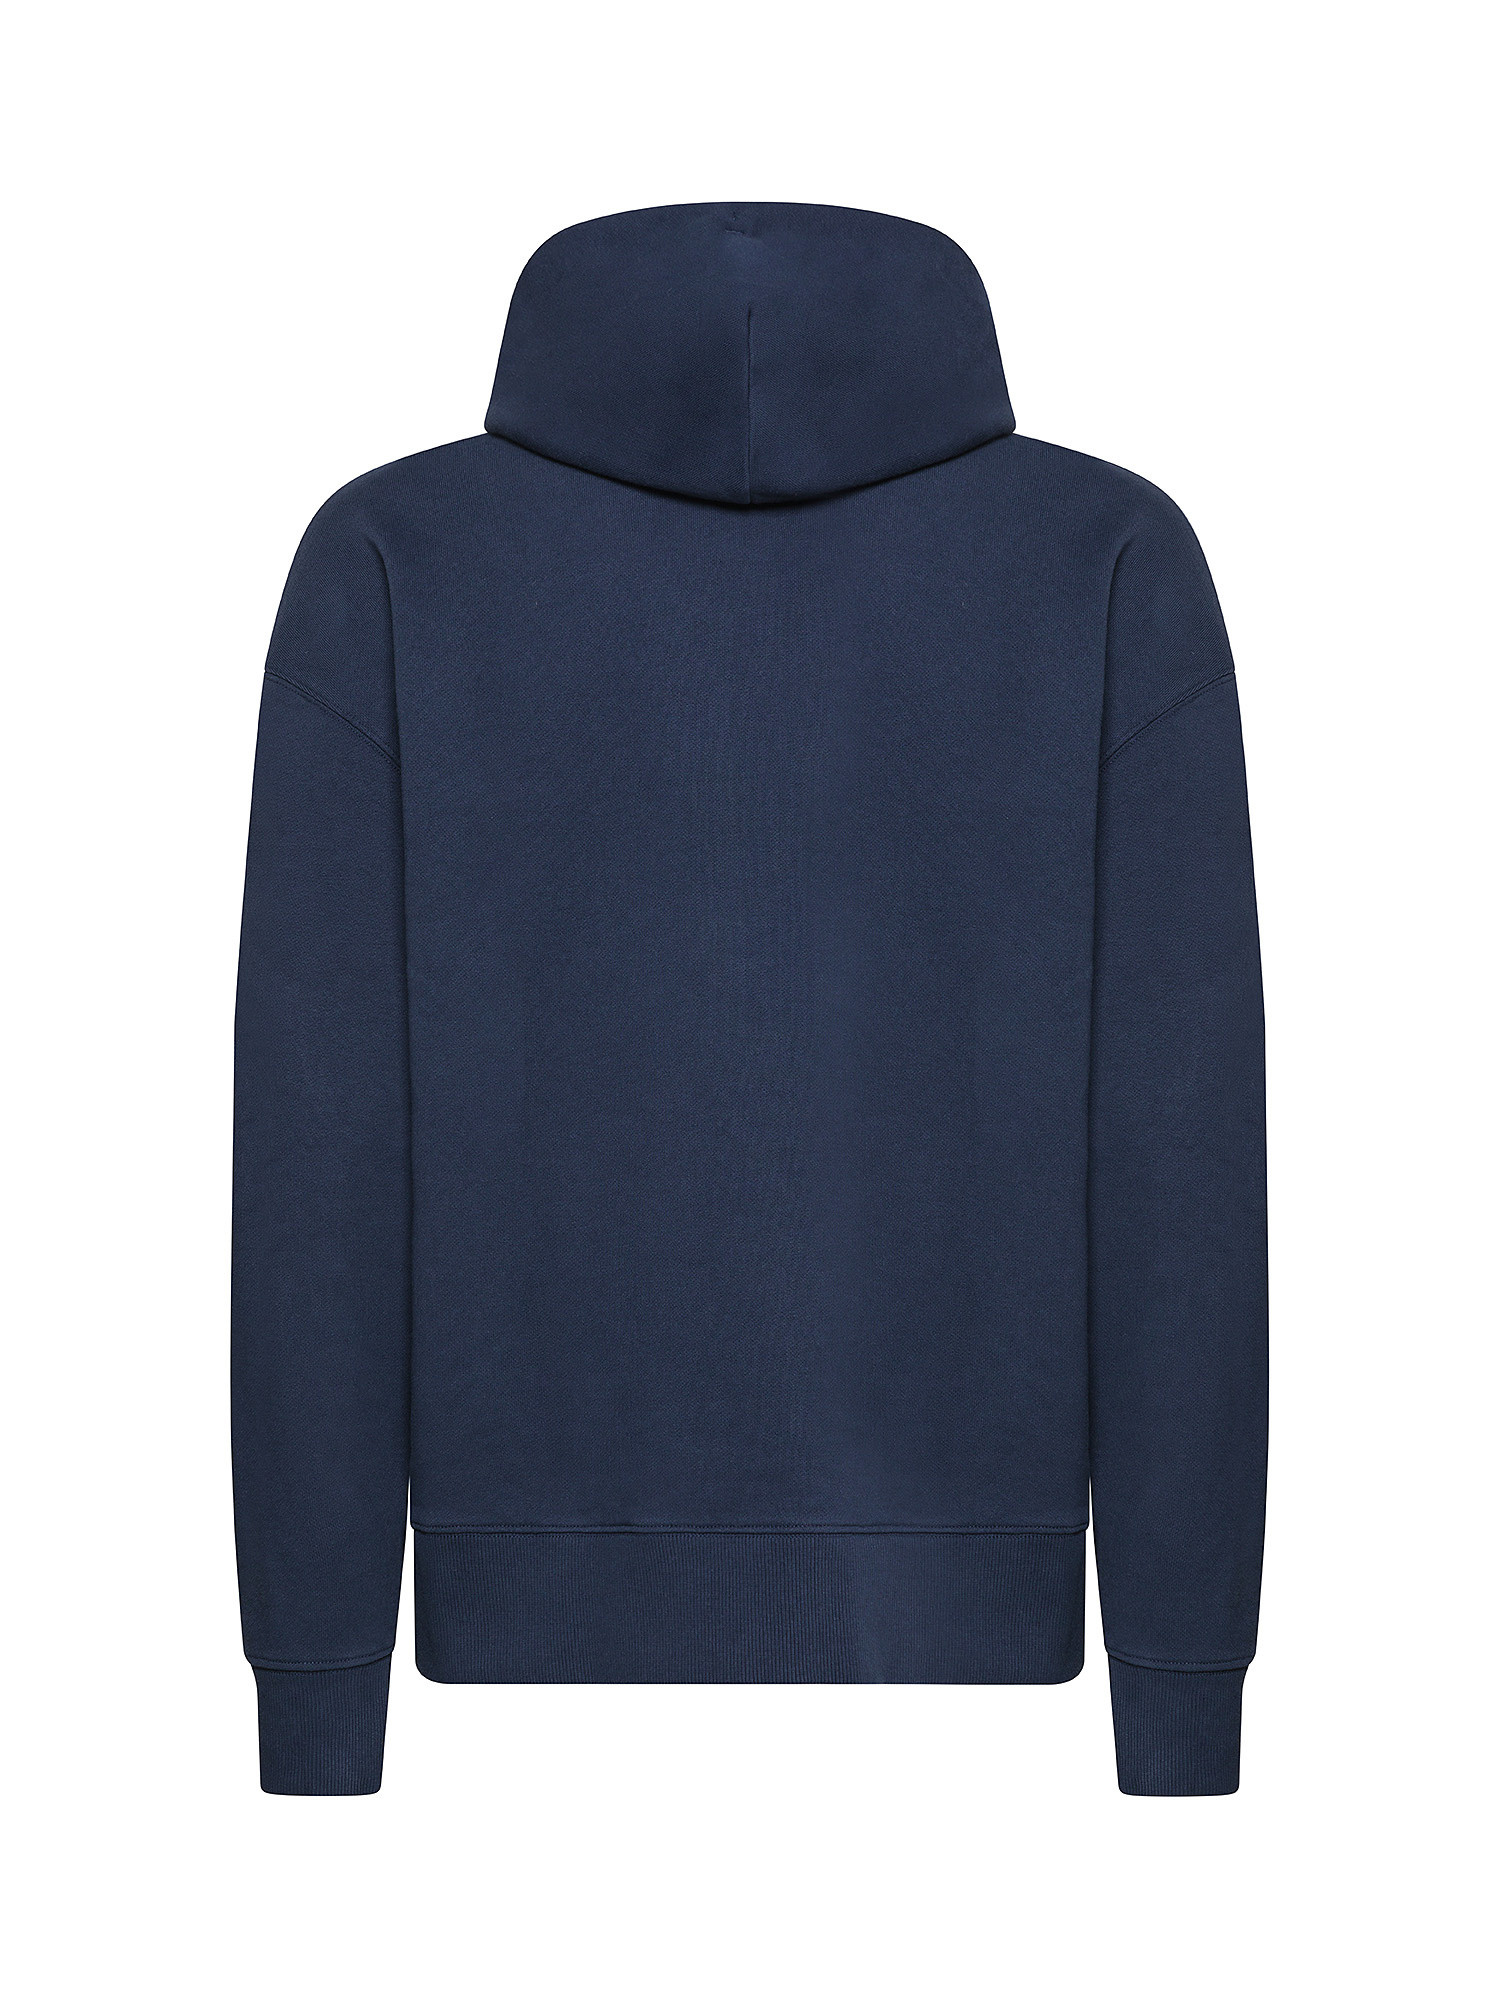 Tommy Jeans - Felpa relaxed fit in cotone con logo, Blu scuro, large image number 1